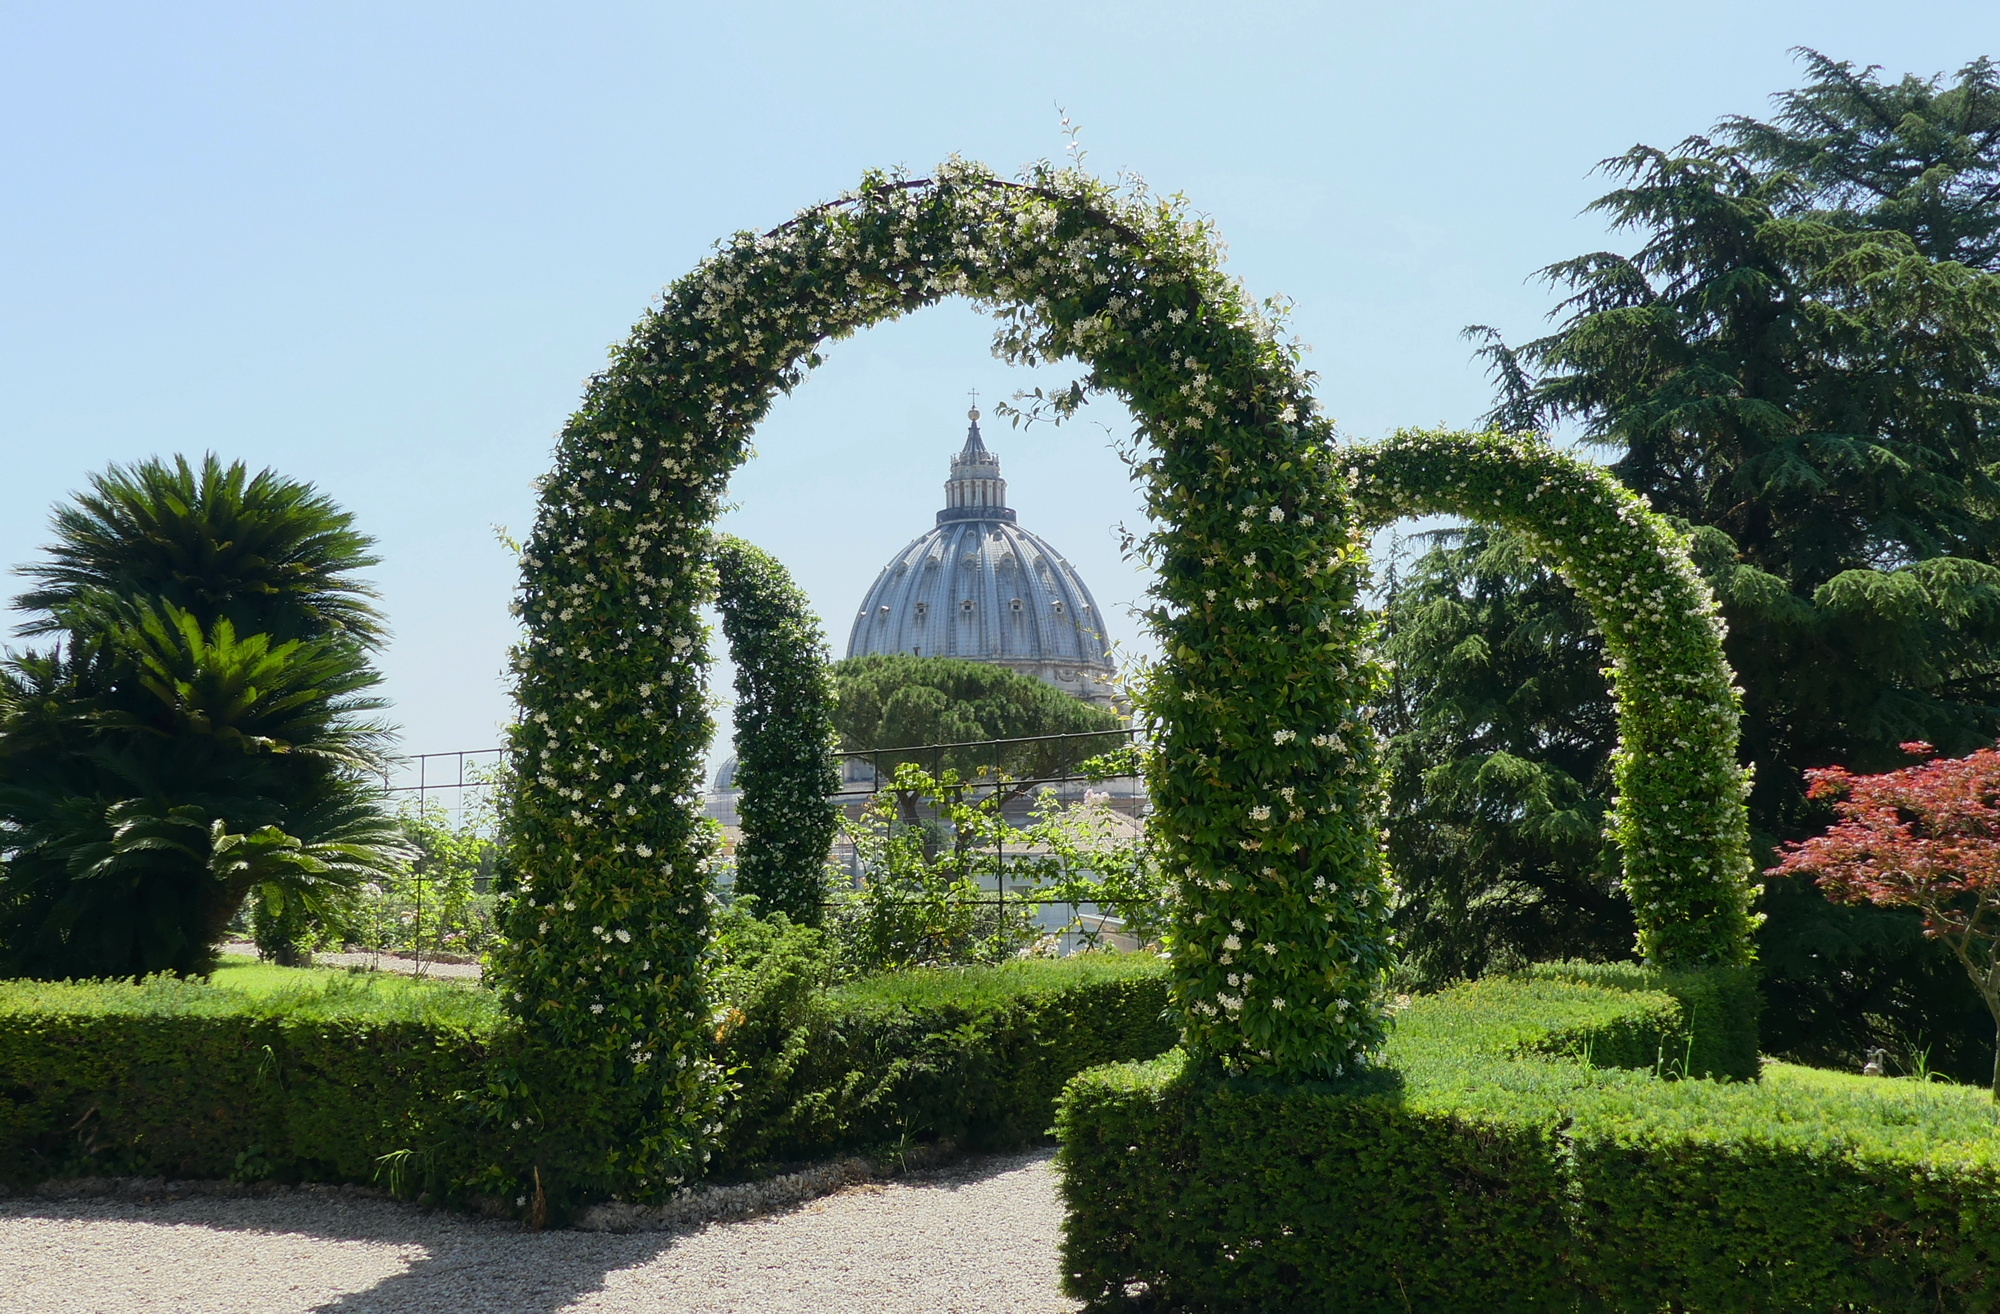 st-peter's-cathedral-seen-from-vatican-gardens.jpg